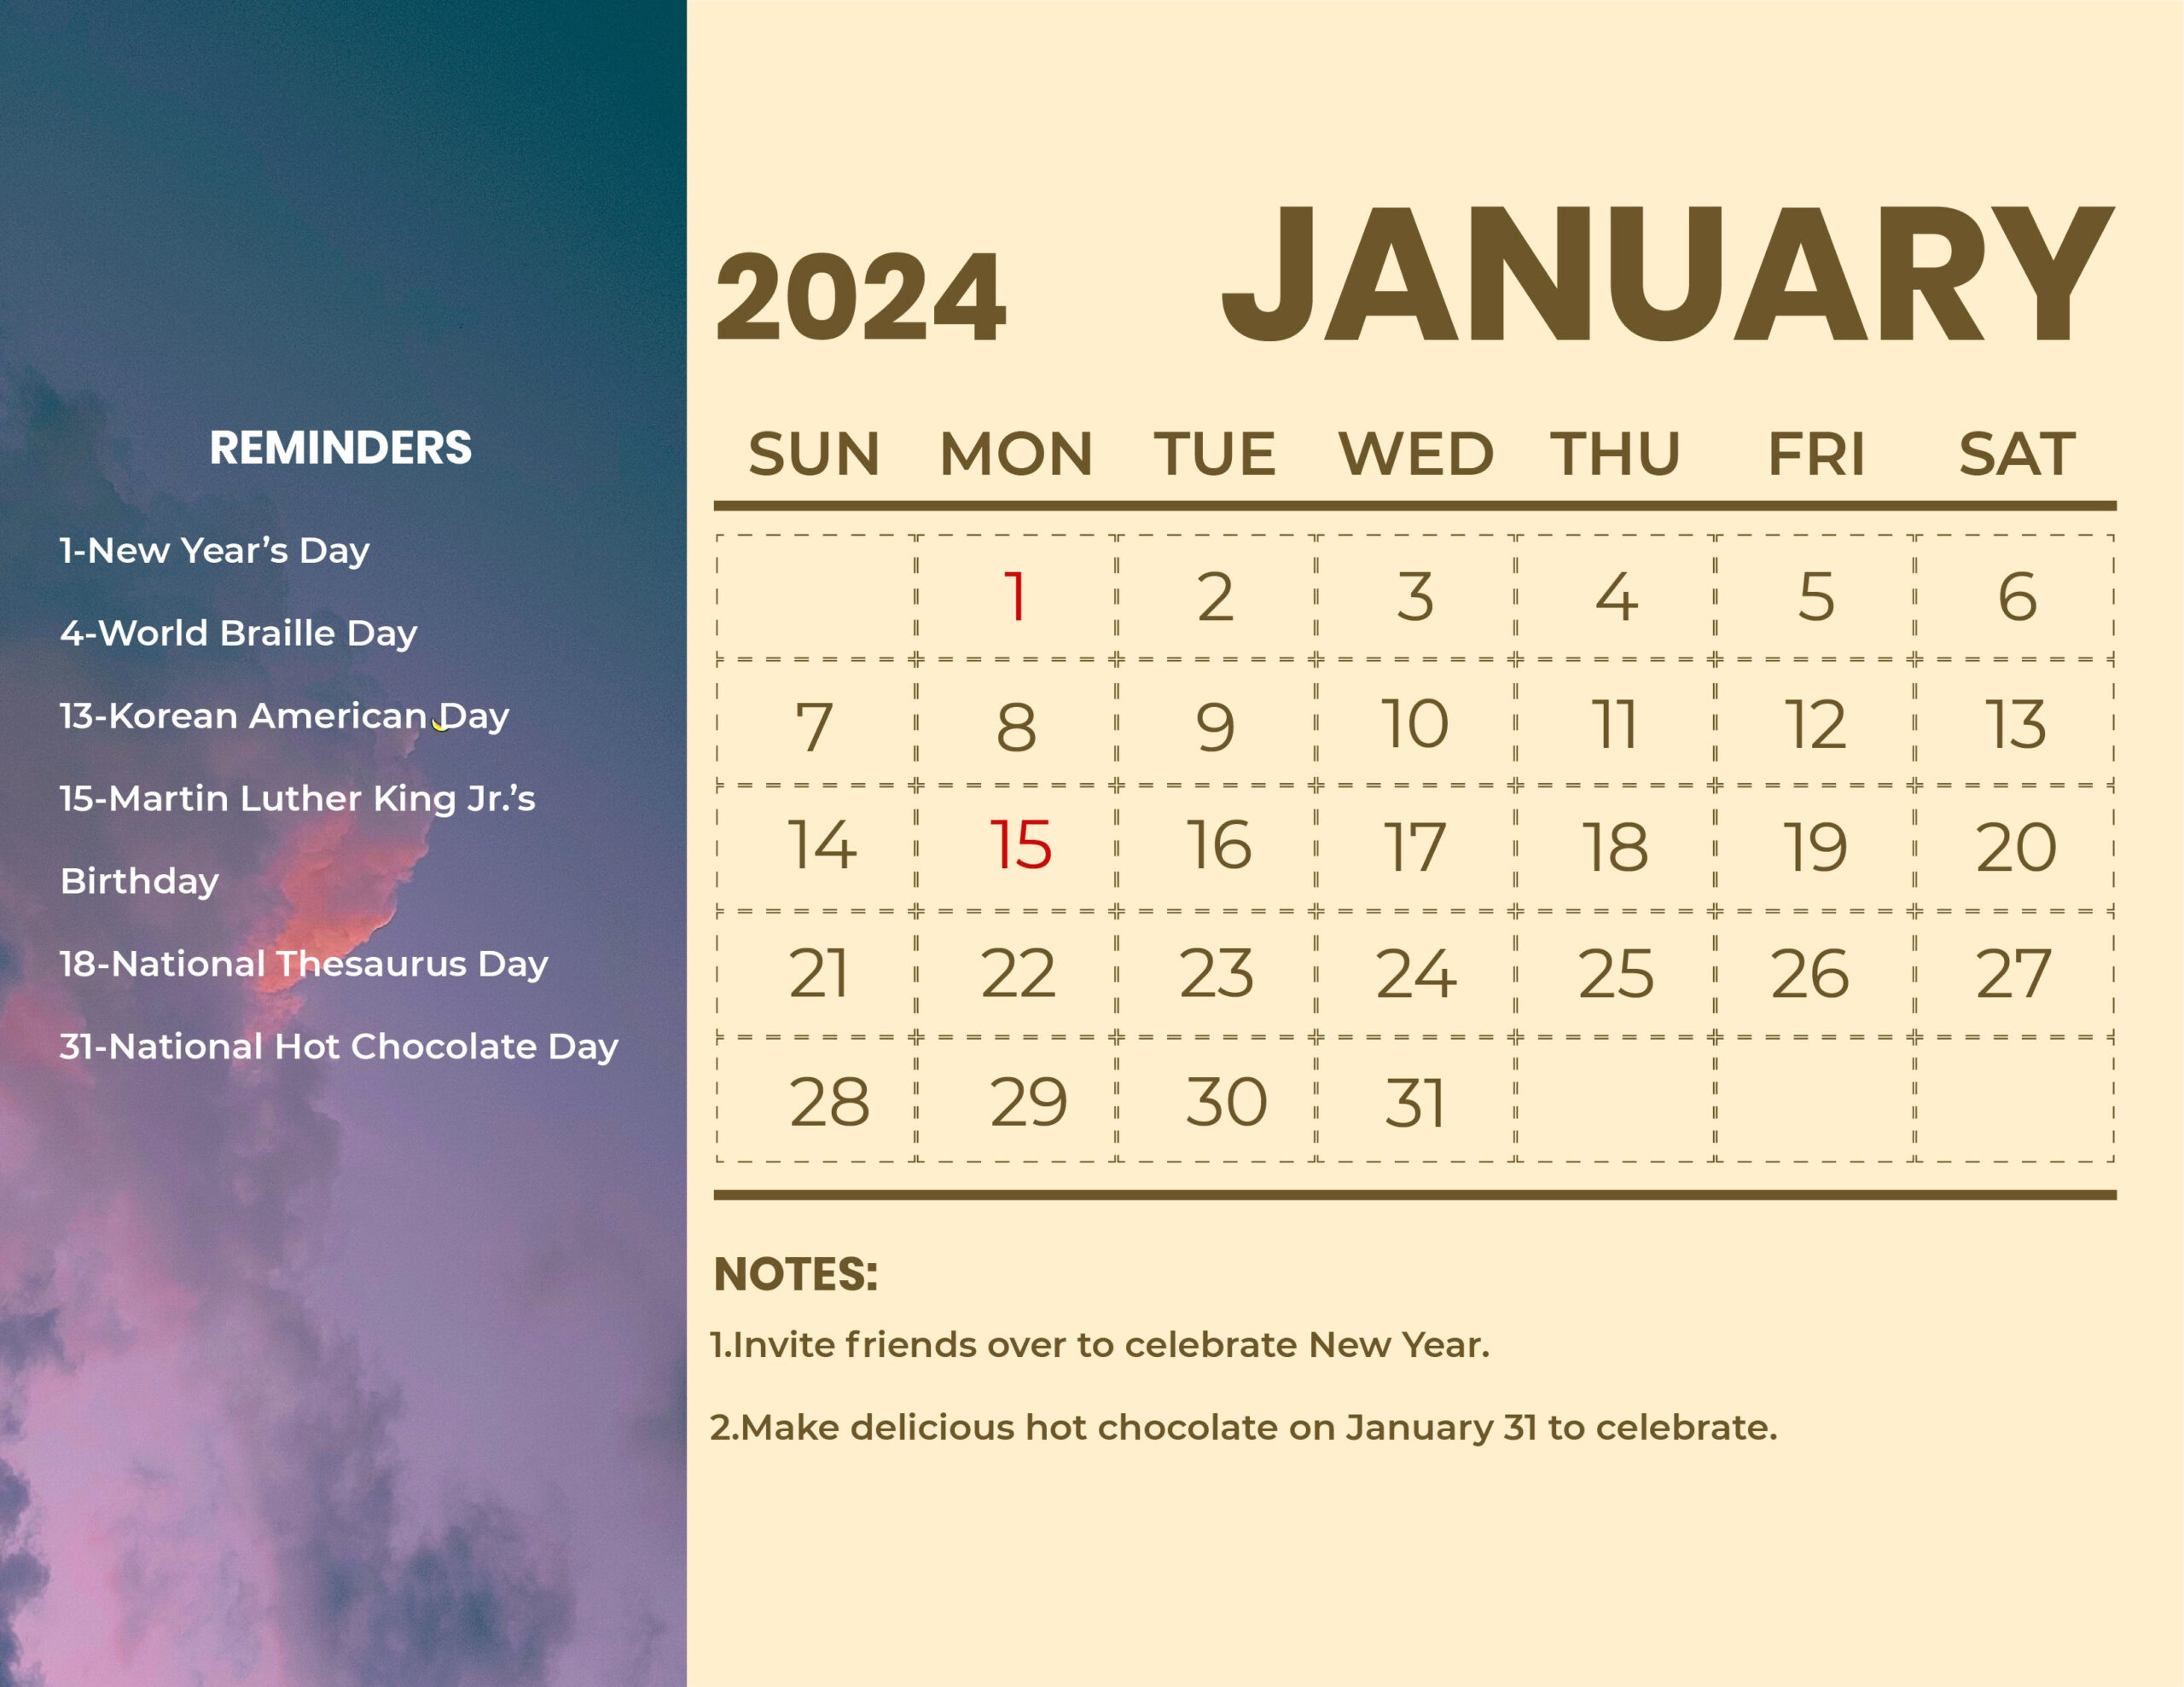 January 2024 Calendar With Holidays - Download In Word for January 2024 Calendar Free Printable With Holidays